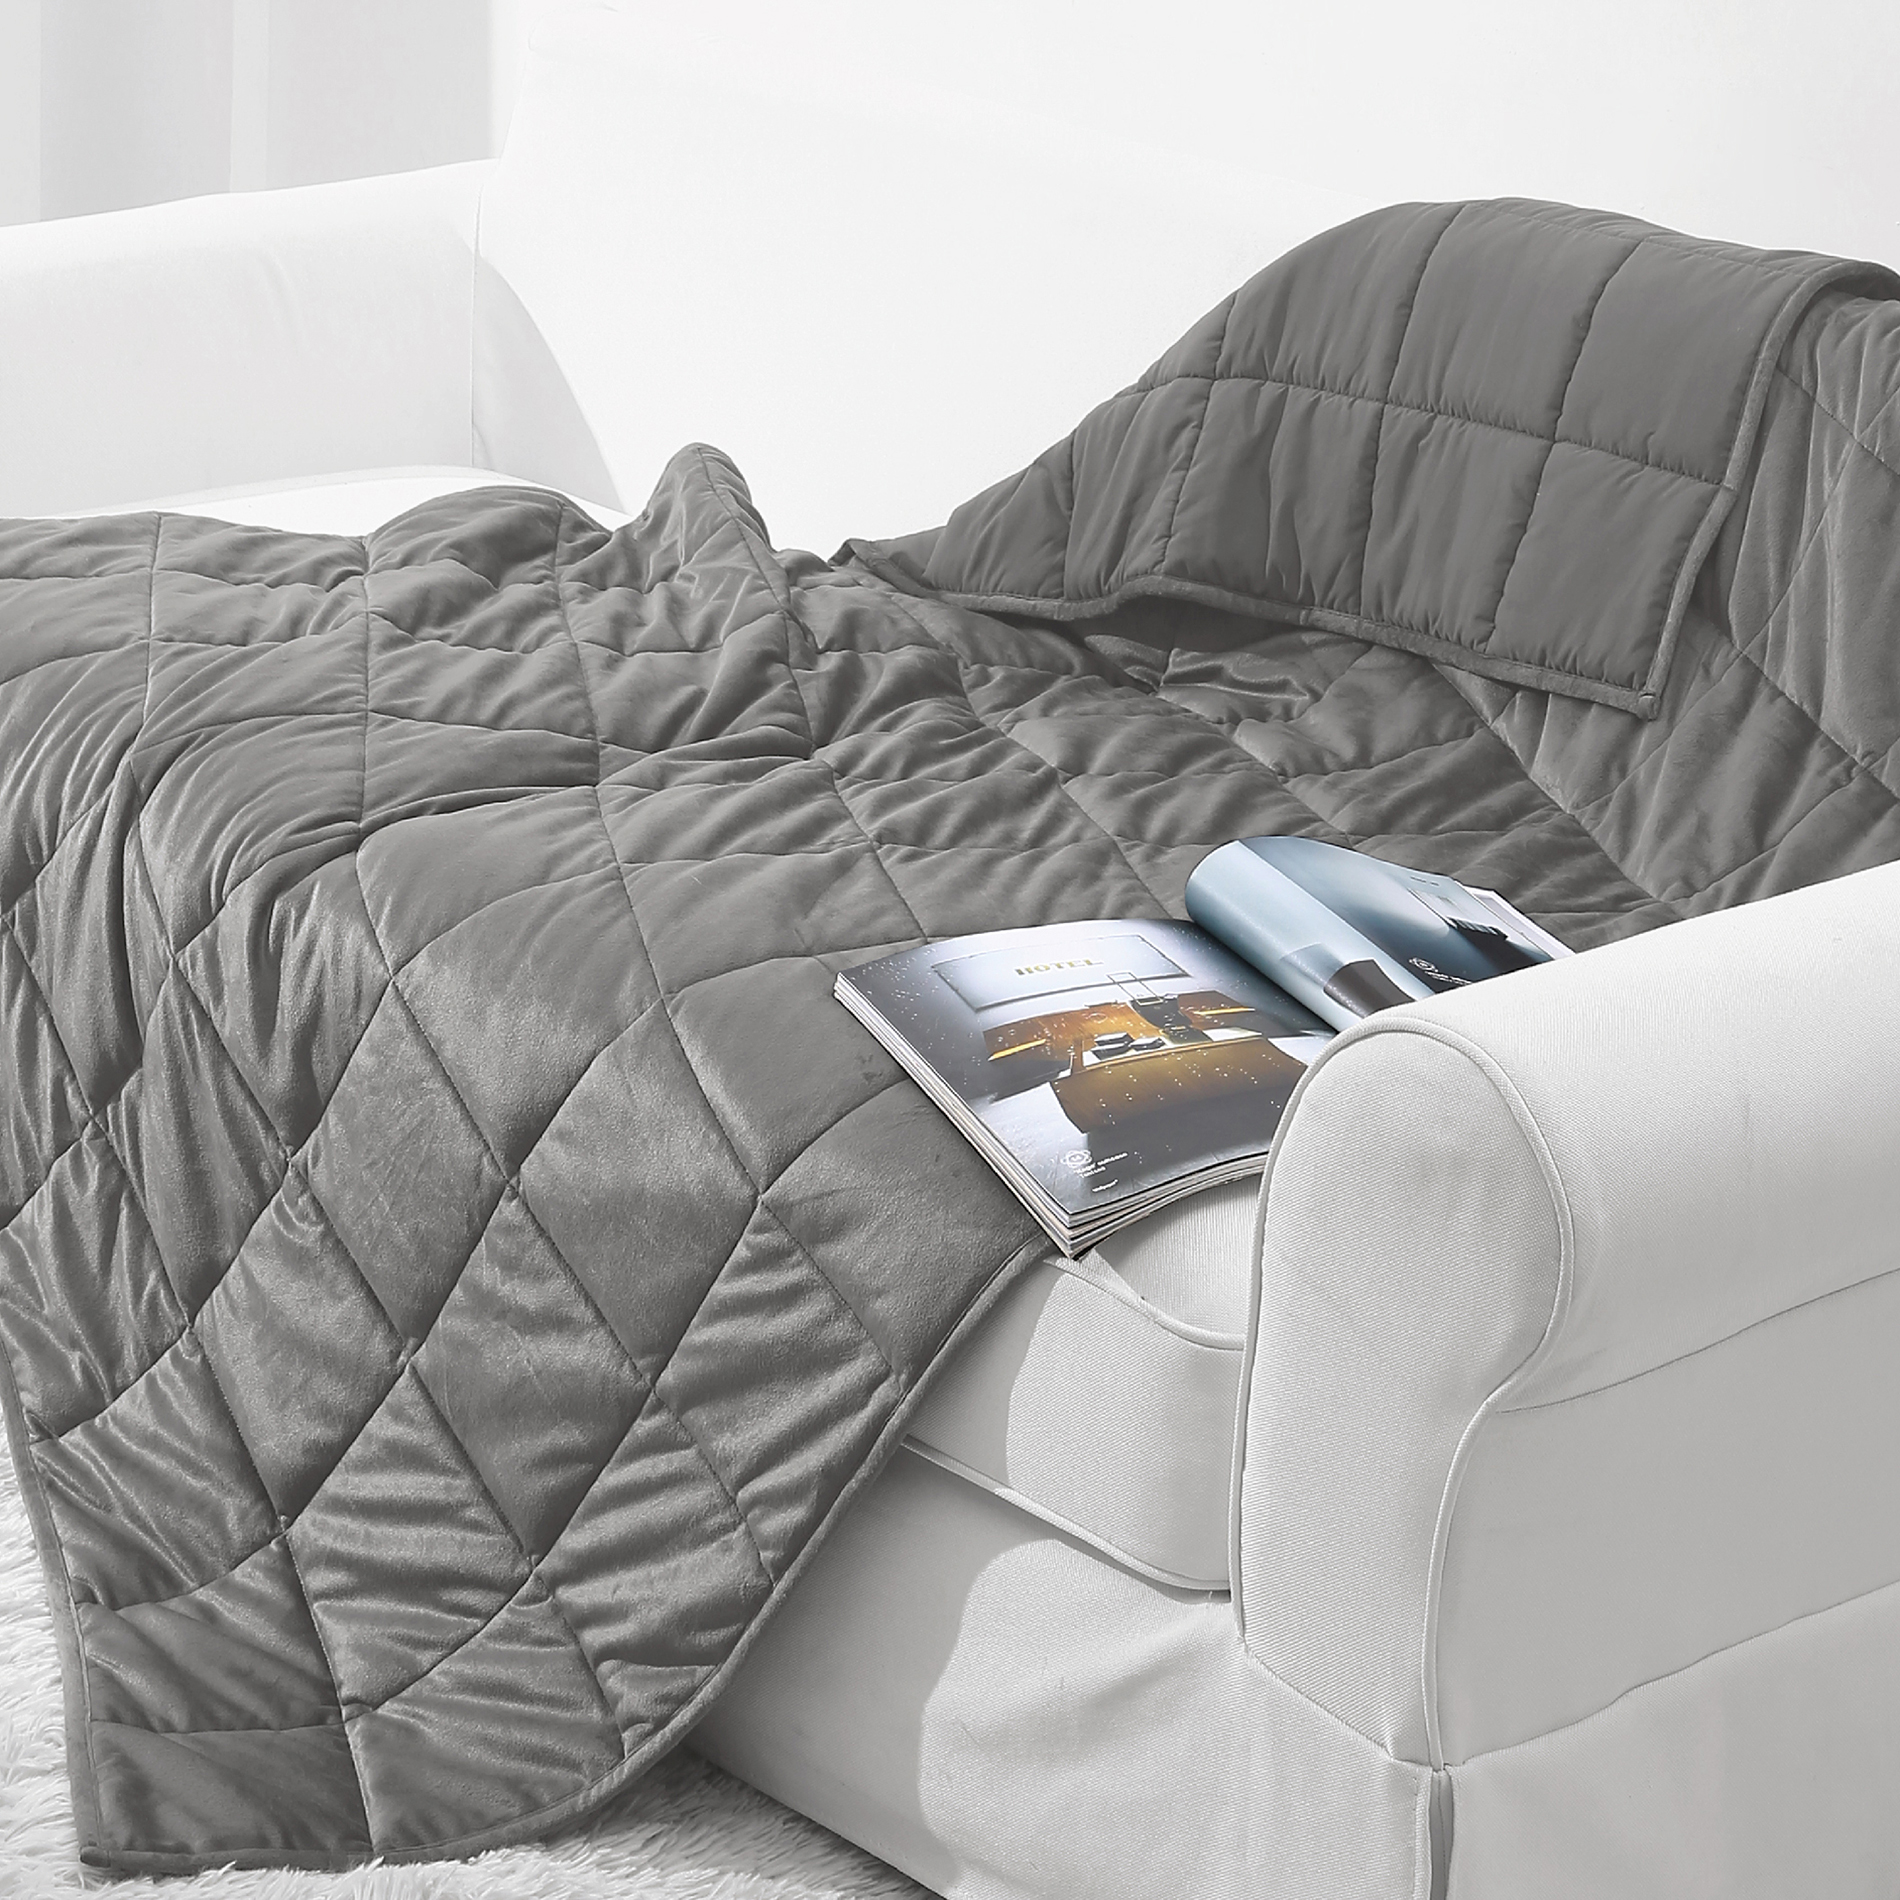 Weighted Blanket 15 lbs. - Gray | Shop Your Way: Online Shopping & Earn